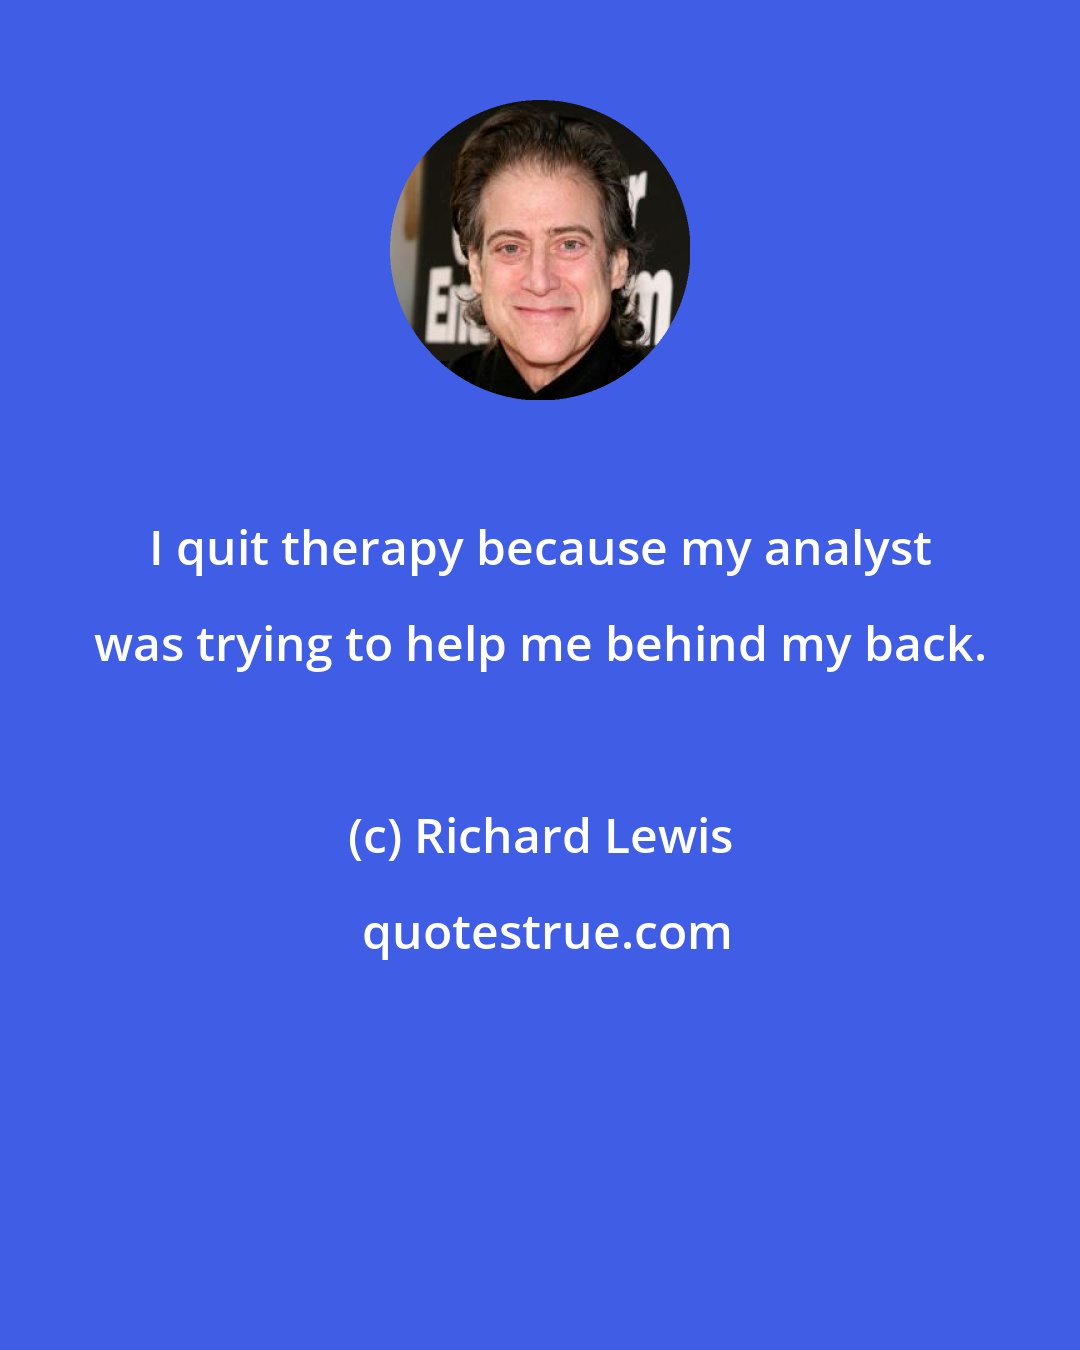 Richard Lewis: I quit therapy because my analyst was trying to help me behind my back.